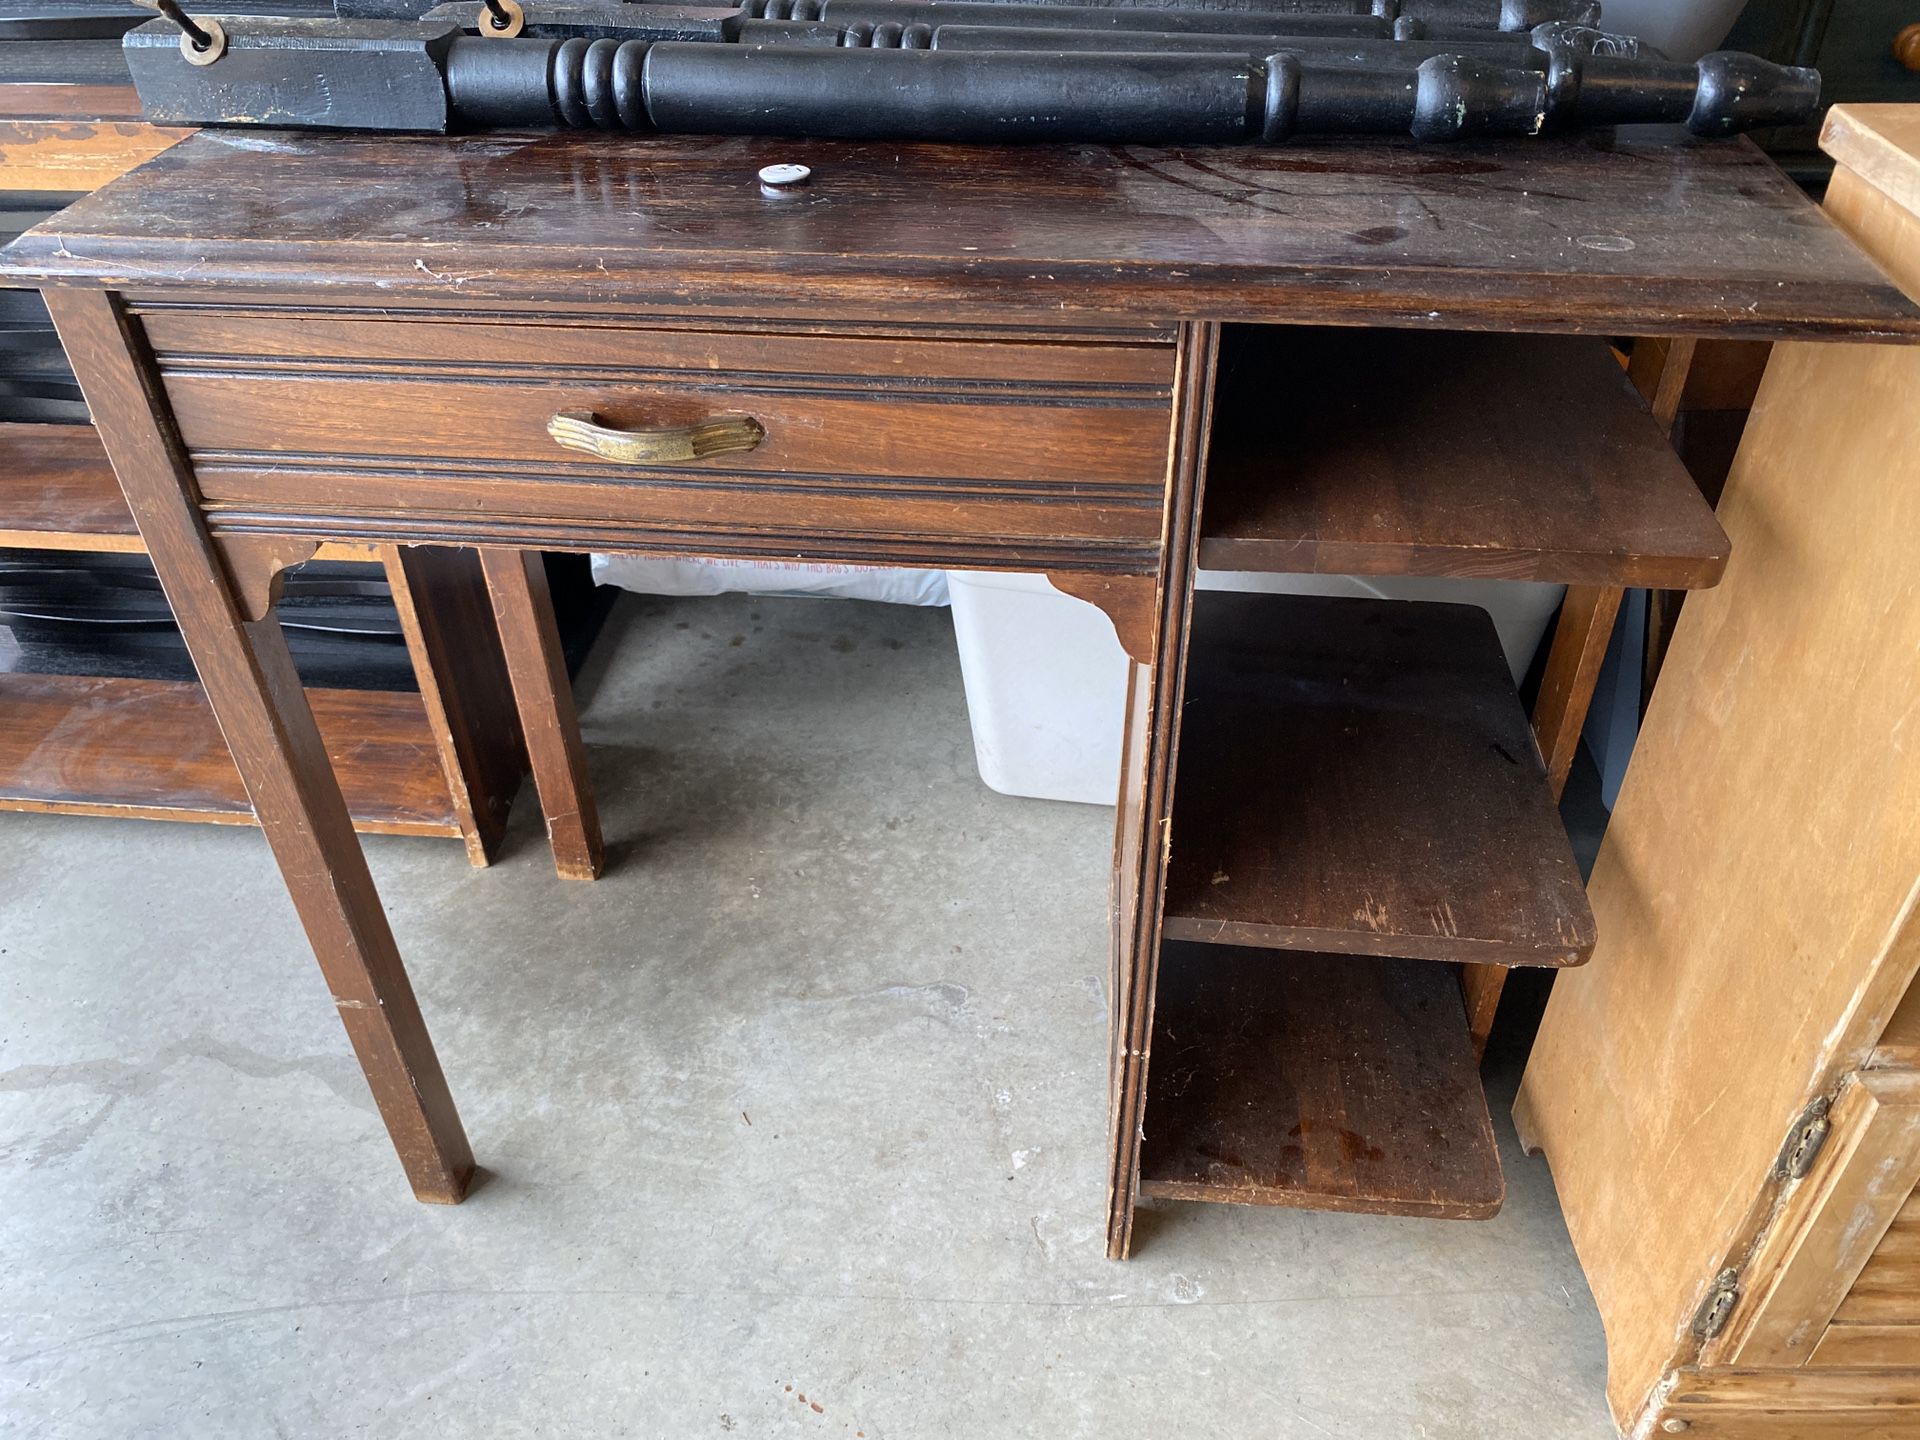 Antique solid wood desk w/functional drawer and shelving